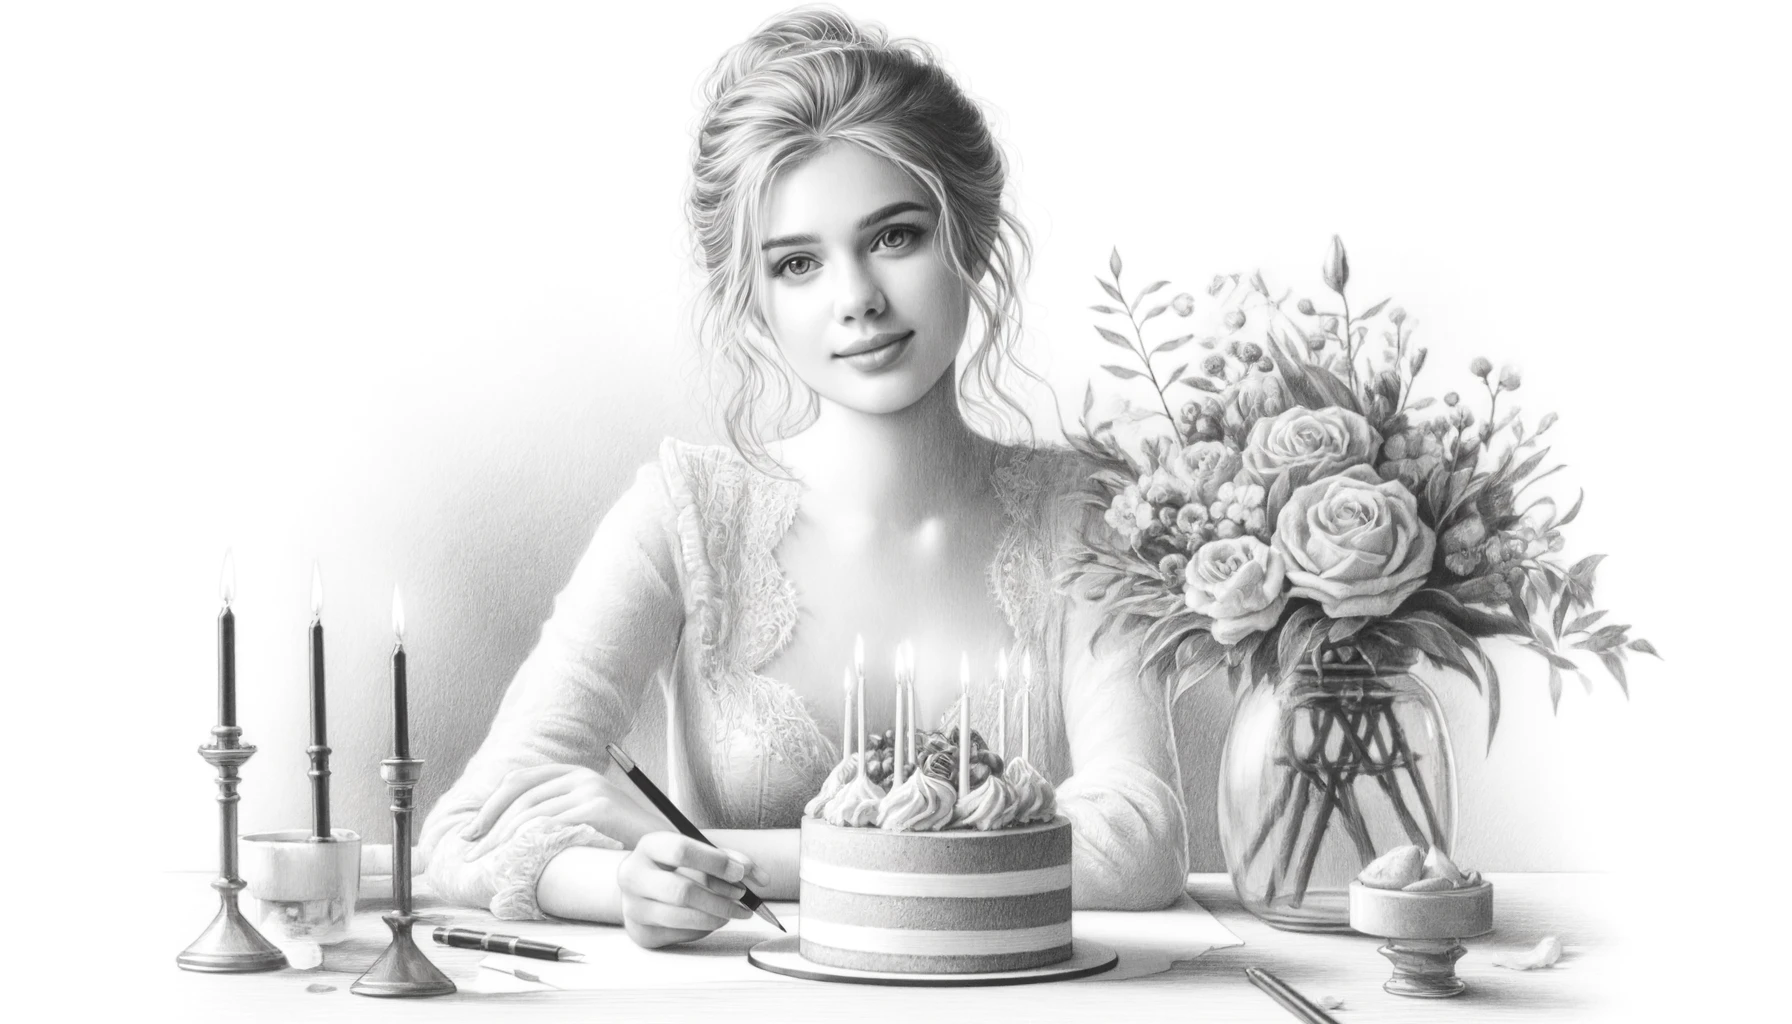 Funny Birthday Wishes for a Young Woman